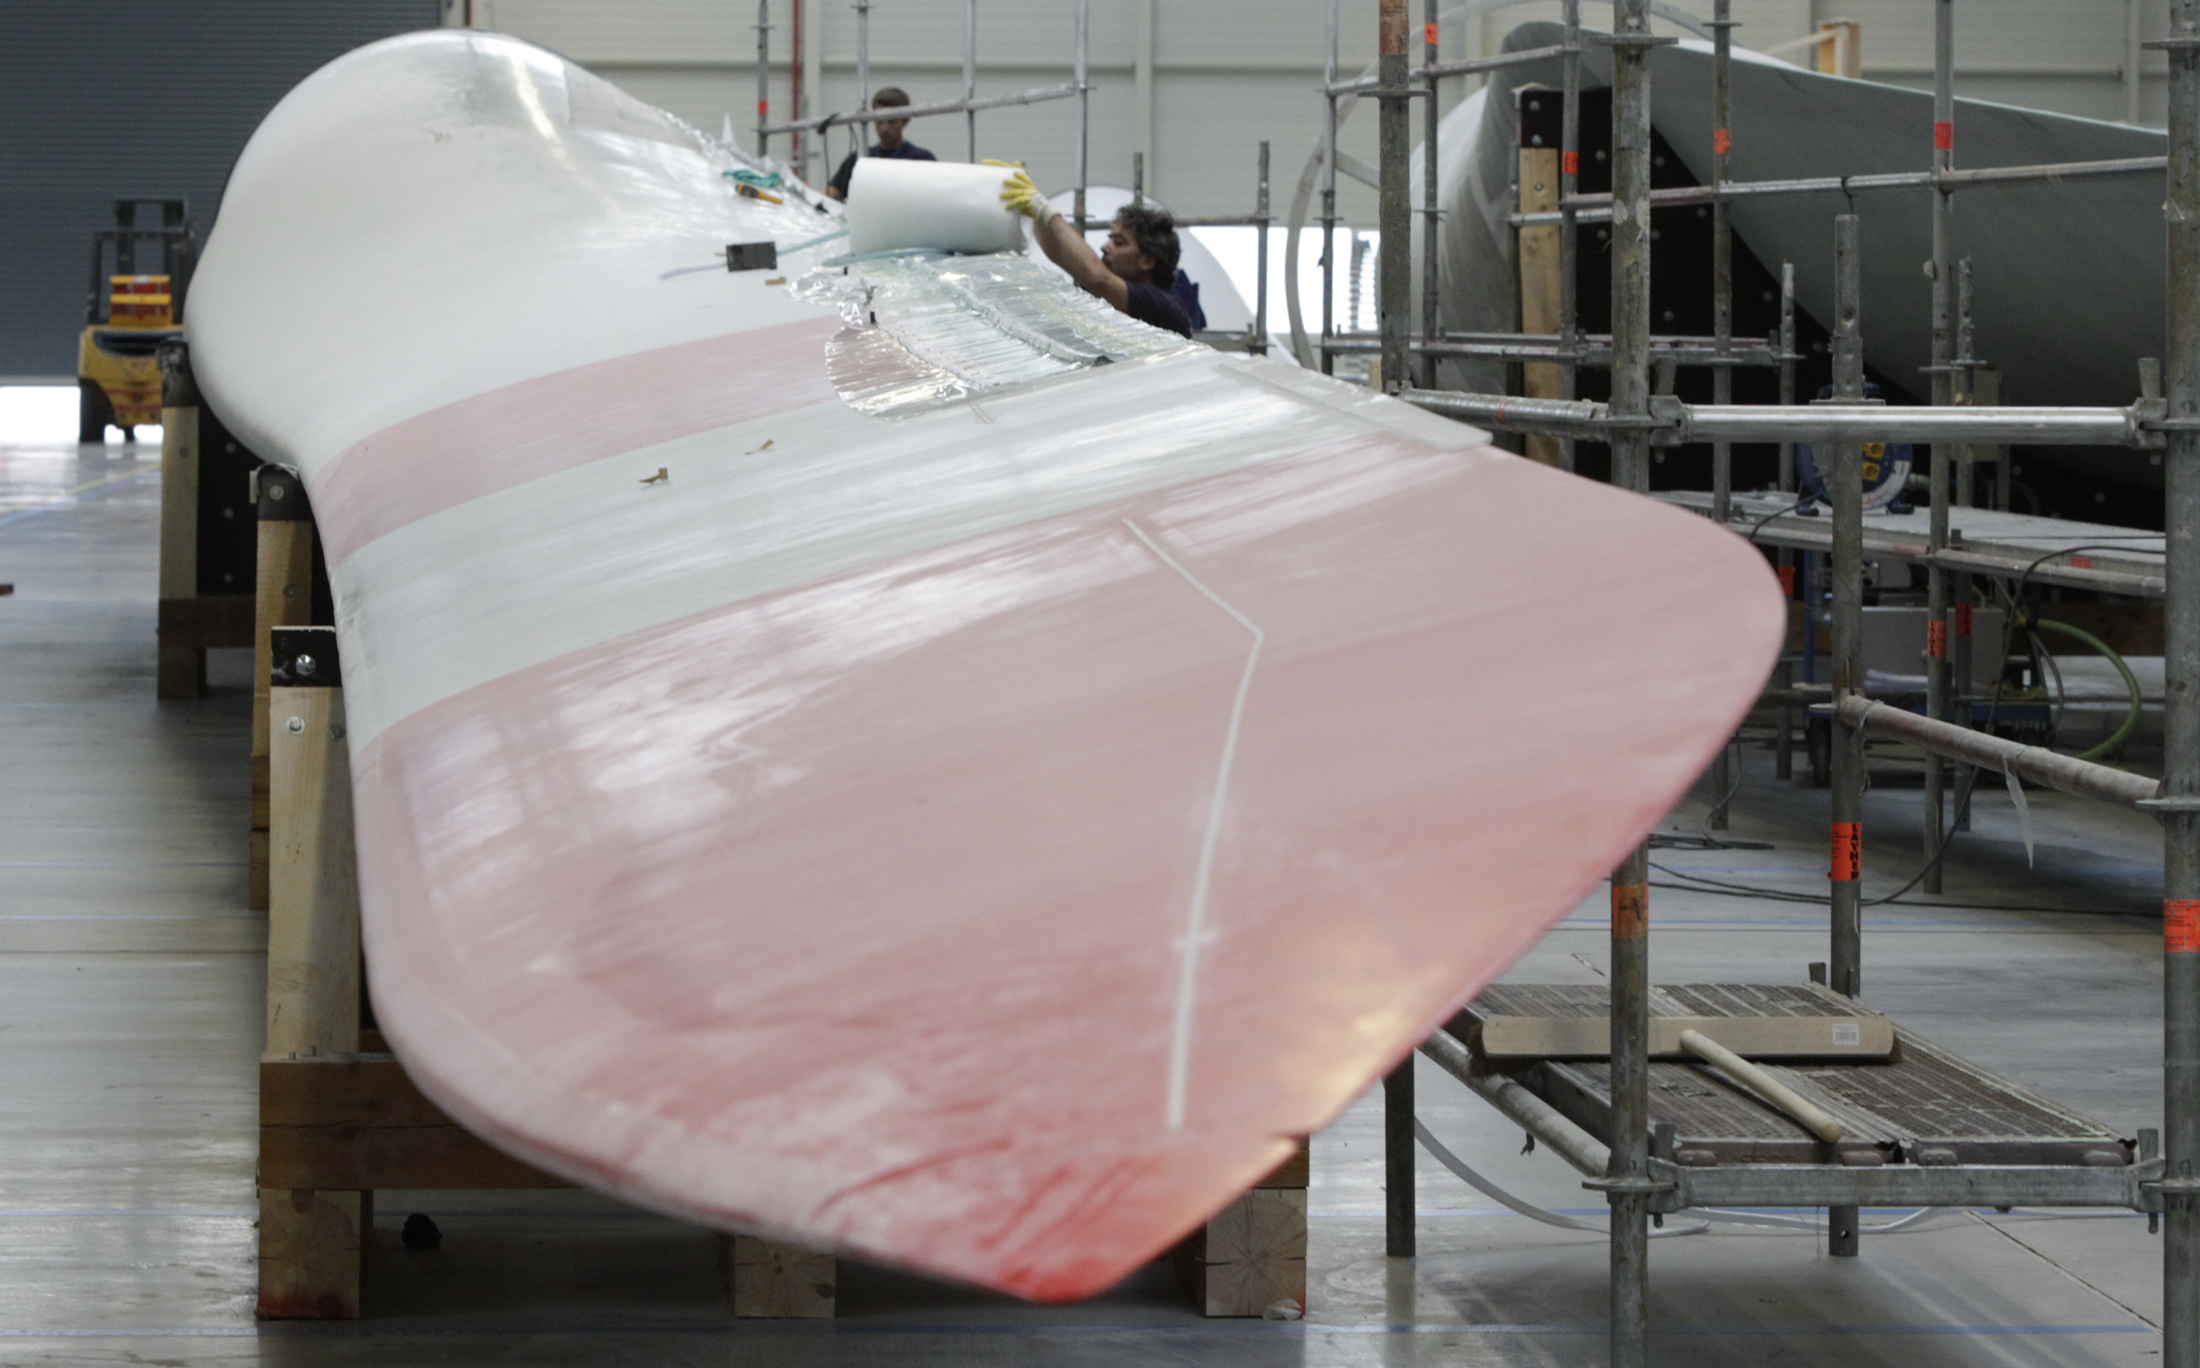 Engineer works on wing at the Nordex wind turbine factory hall in Rostock